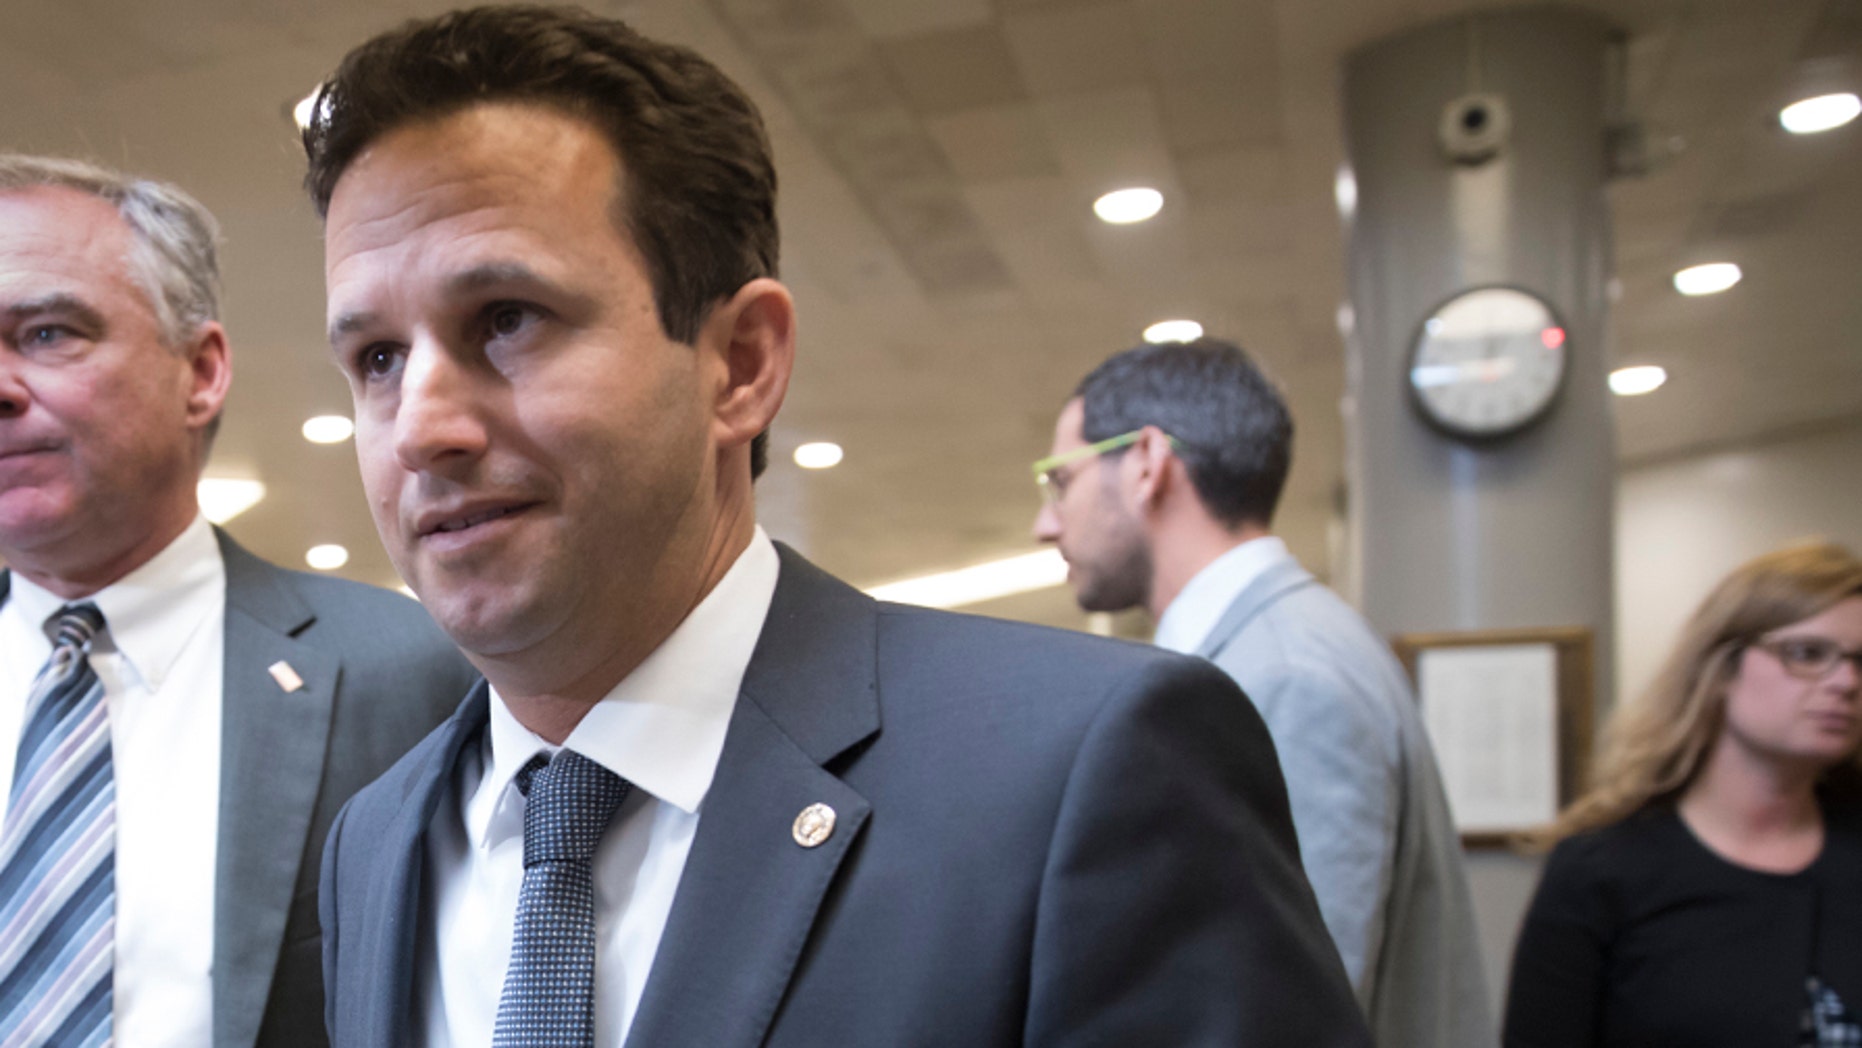 Sen. Brian Schatz, D-Hawaii, ultimately deleted his questionable tweet about tear gas at the U.S-Mexico border.